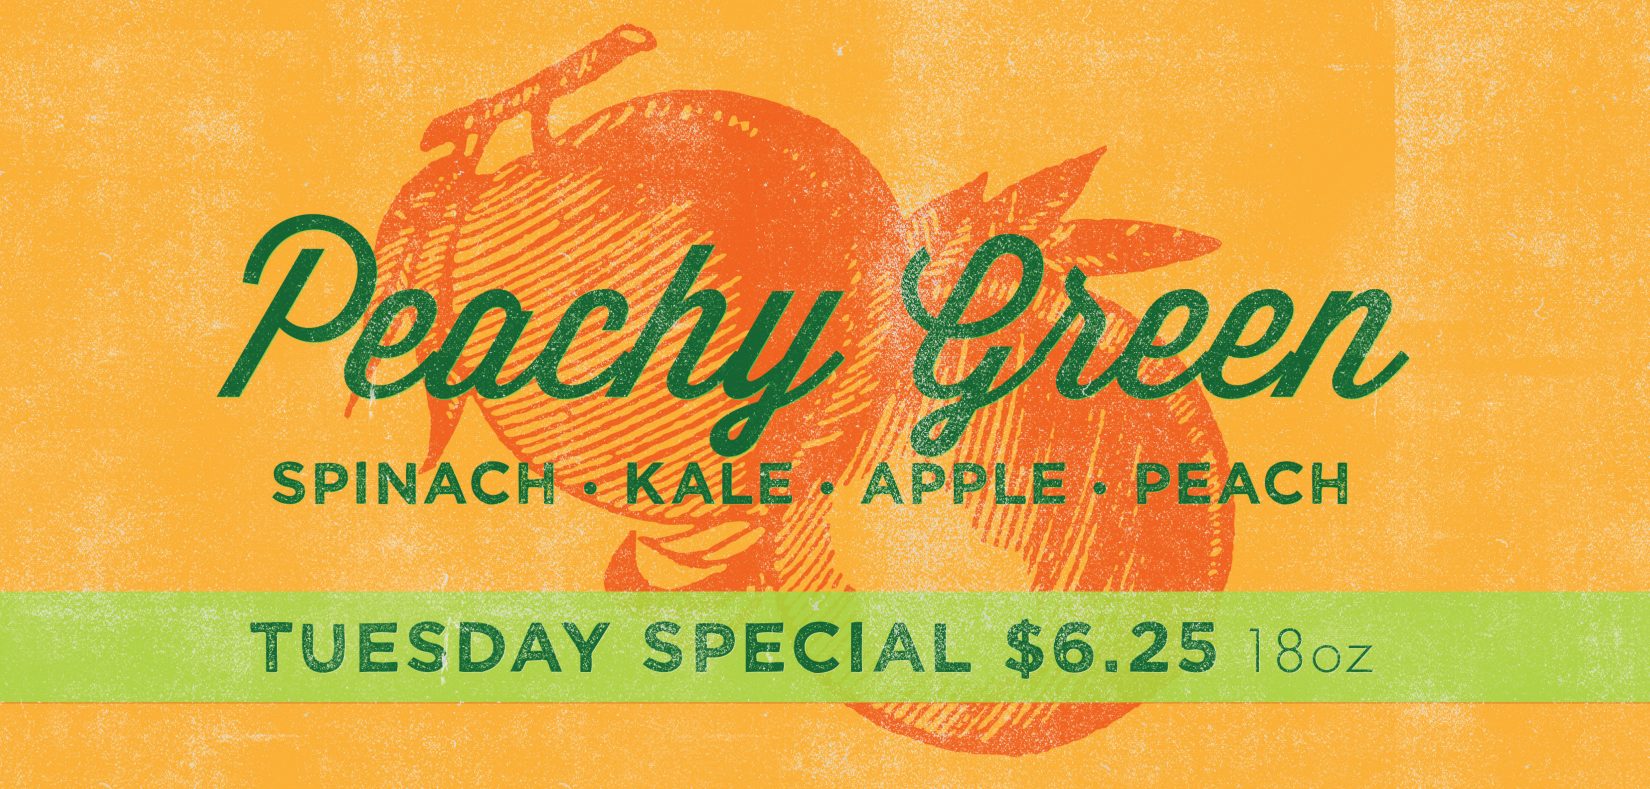 Juiceland Peachy Green special